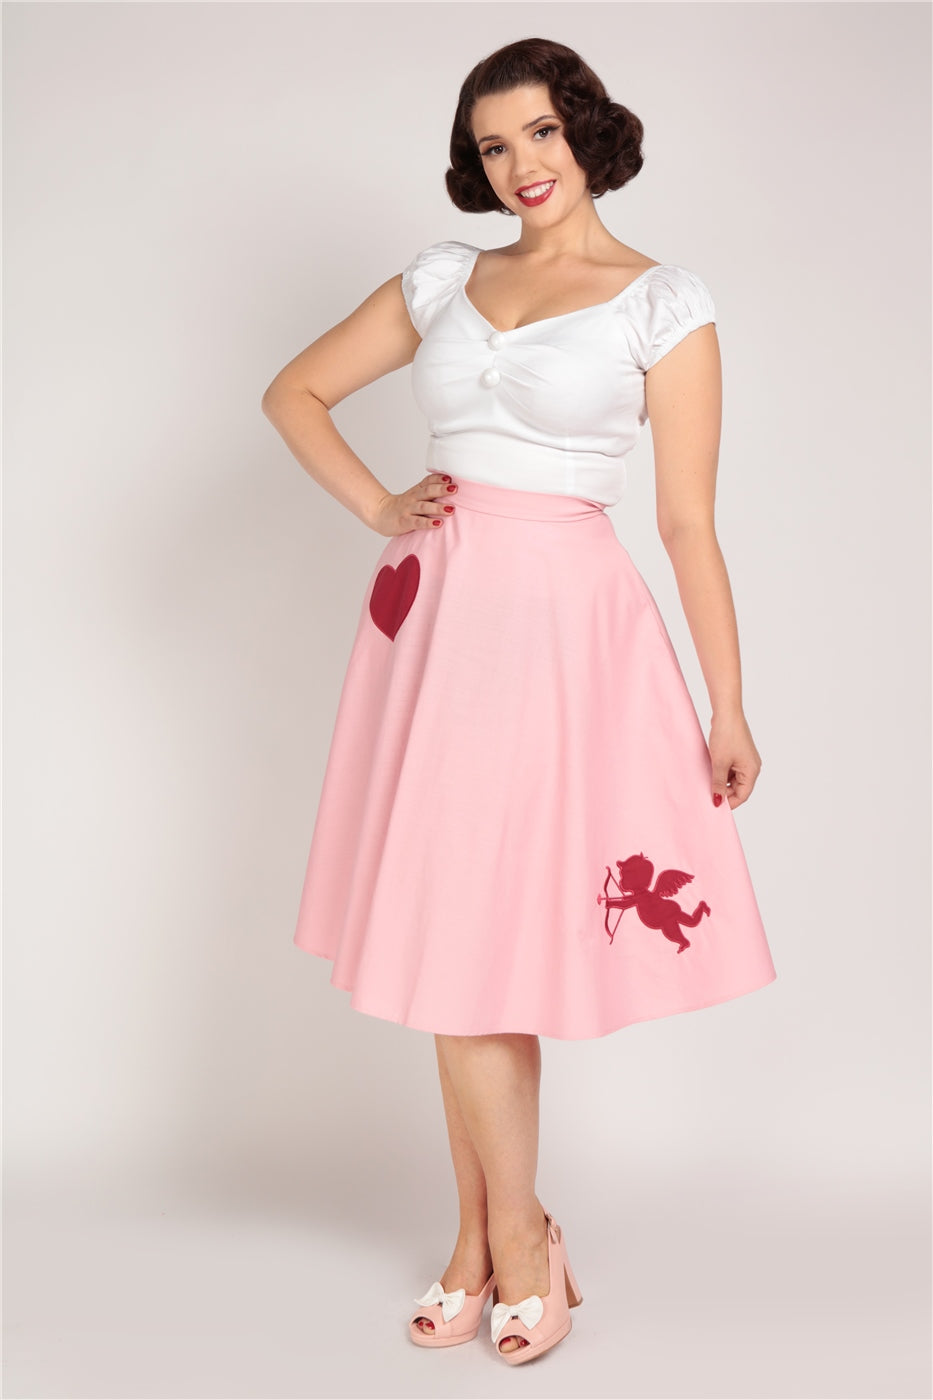 Happy, smiling lady wearing the white Dolores top and the Cupid Swing Skirt by Collectif